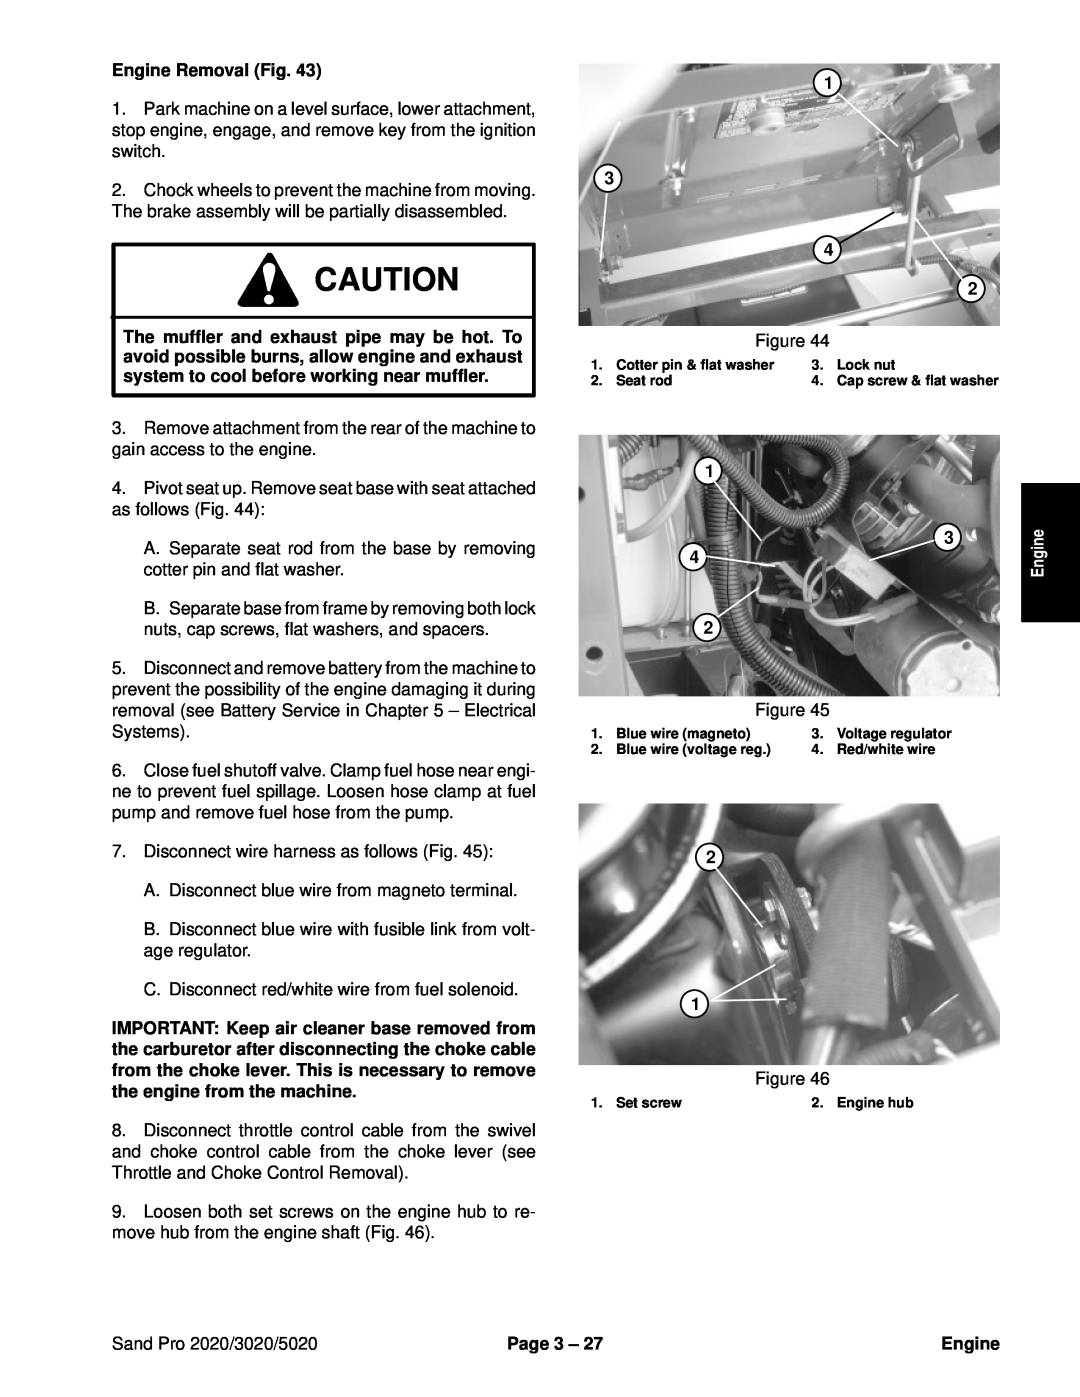 Toro service manual Engine Removal Fig, Sand Pro 2020/3020/5020, Page 3 